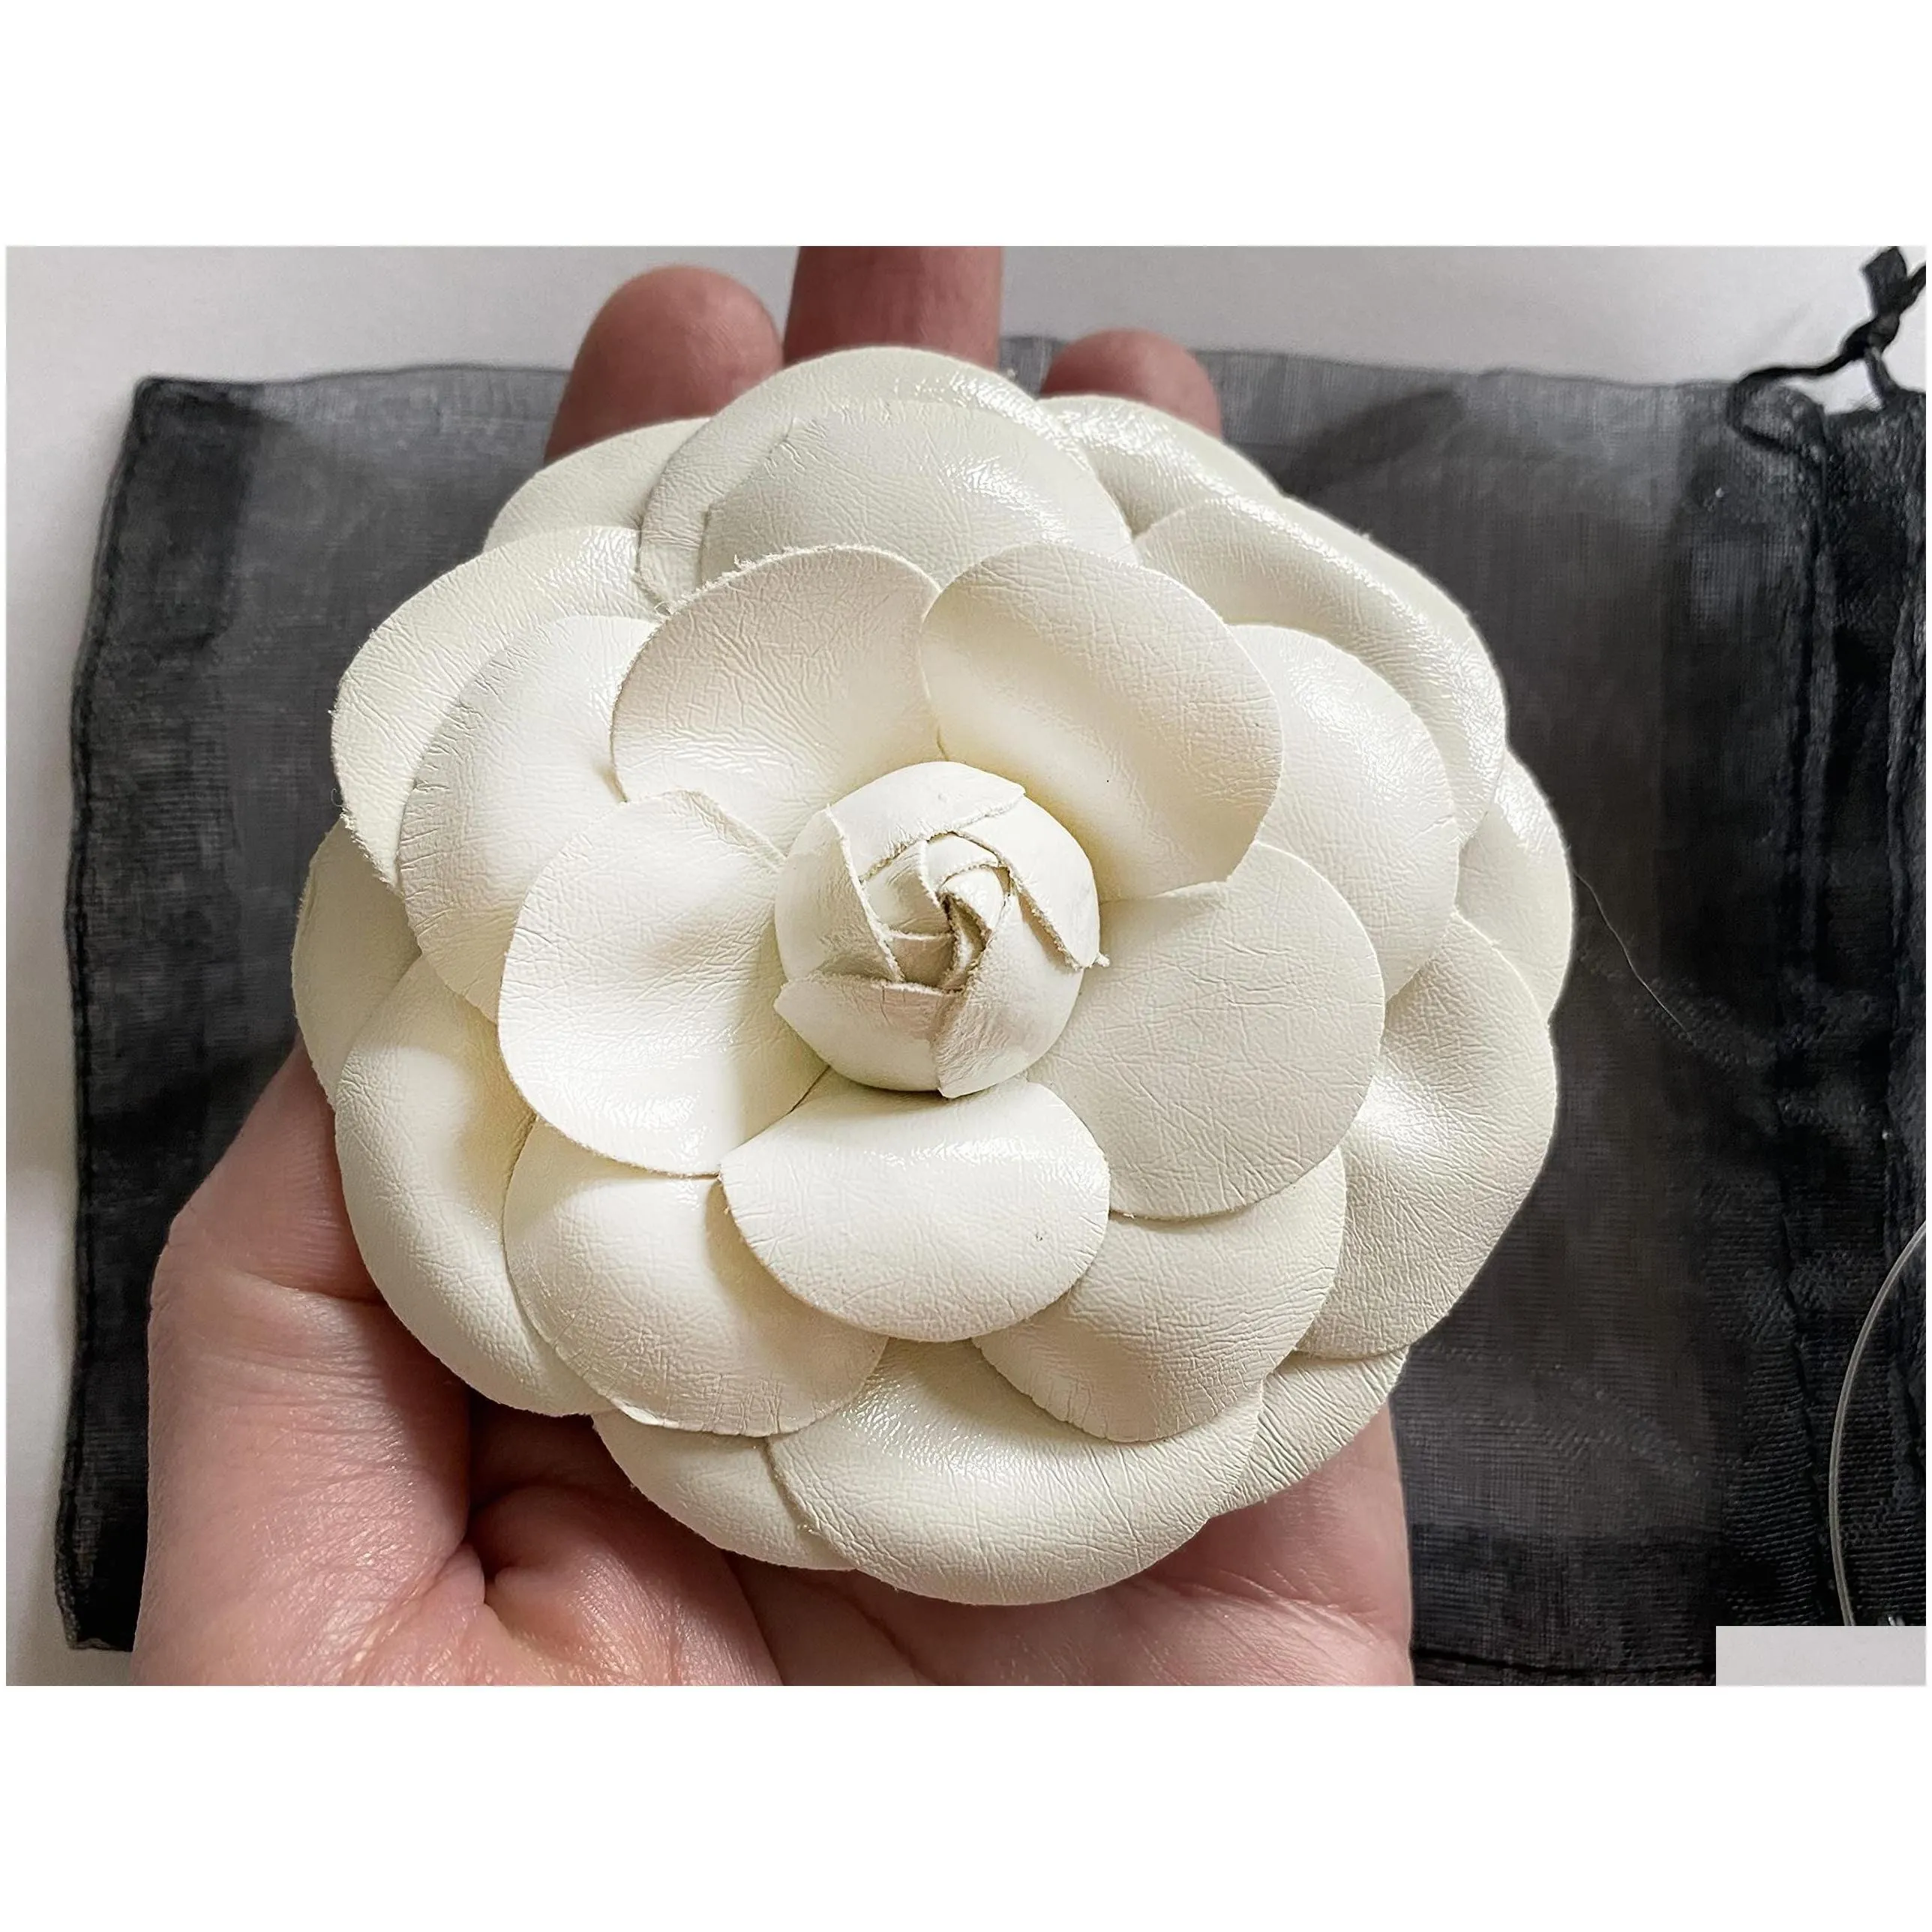 Pins Brooches Pins Misasha Womens Camellia Flower Pin Brooch With Organza Gift Bag Drop Delivery Amajewelry Amsrz Jewelry Dhgxt